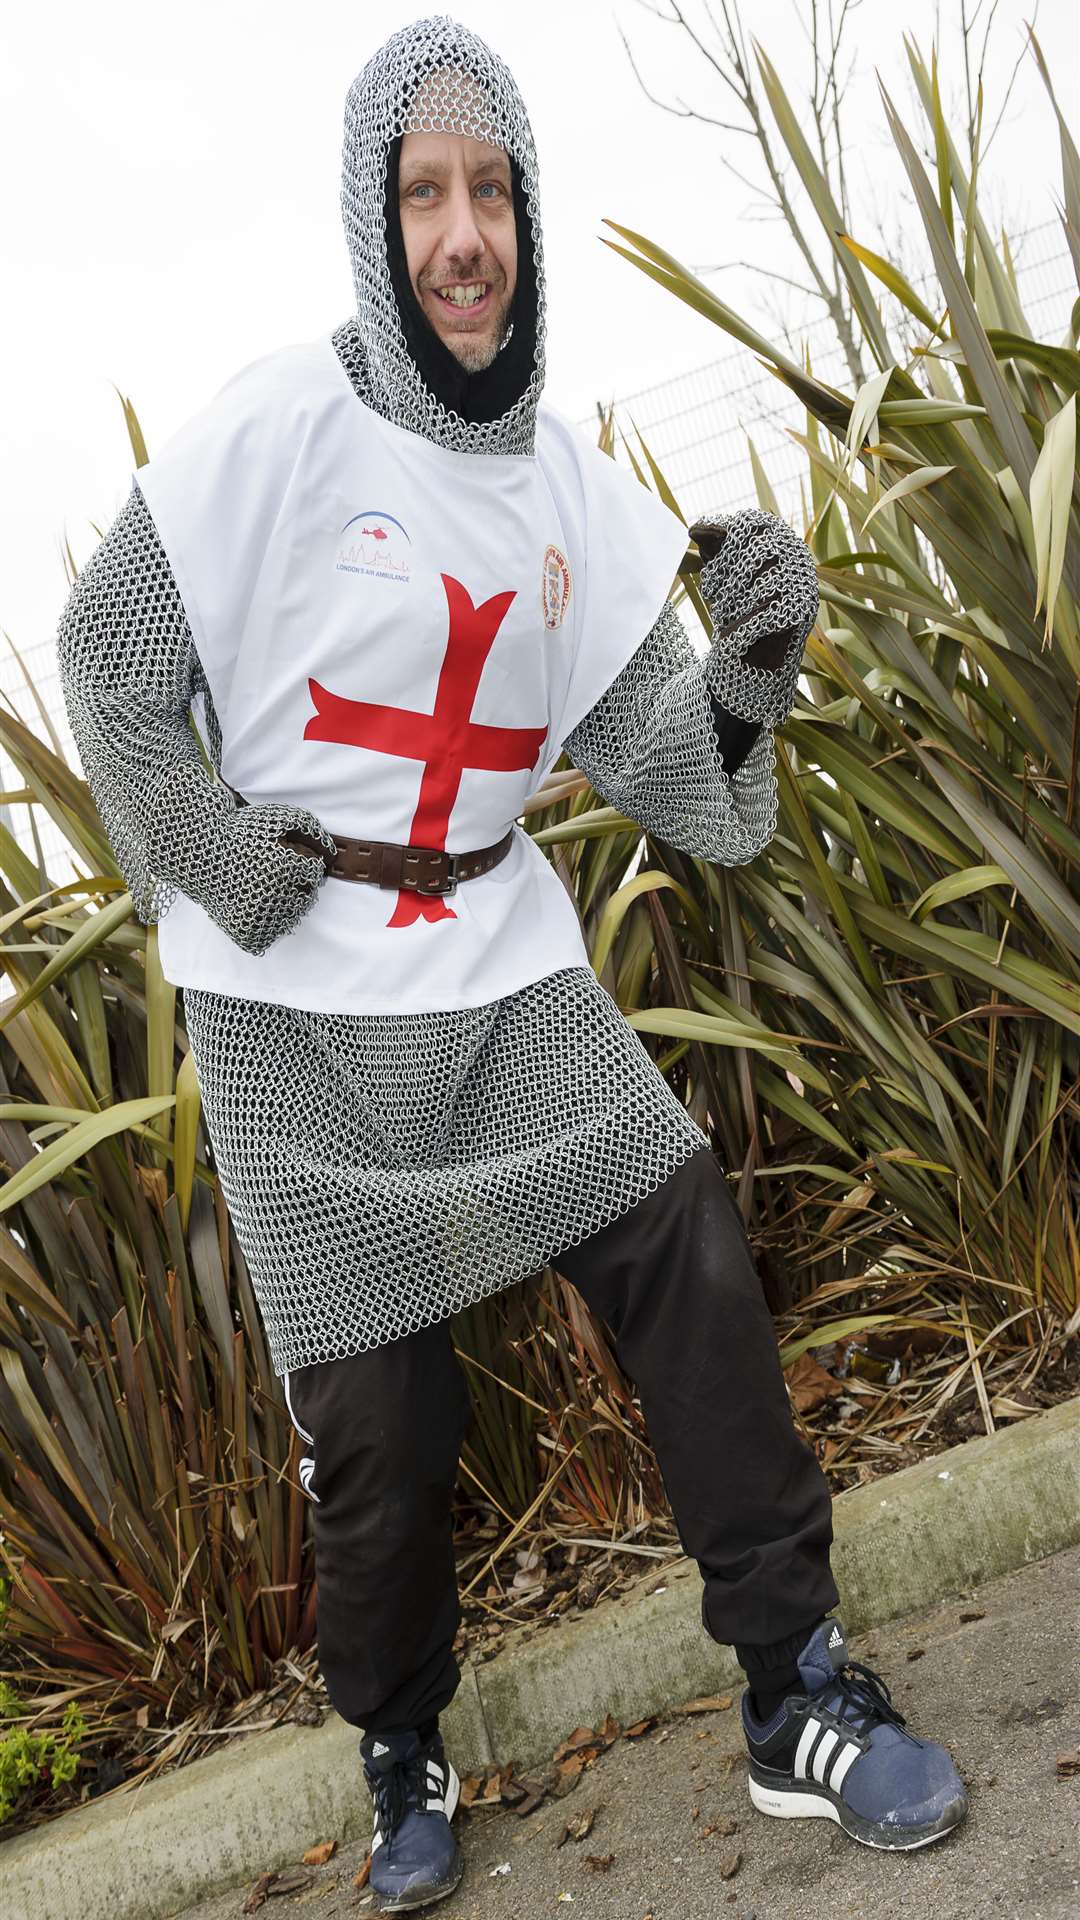 Dave Cooke, who will be running the London Marathon in aid of the London Air Ambulance in almost 20kg of chain mail.